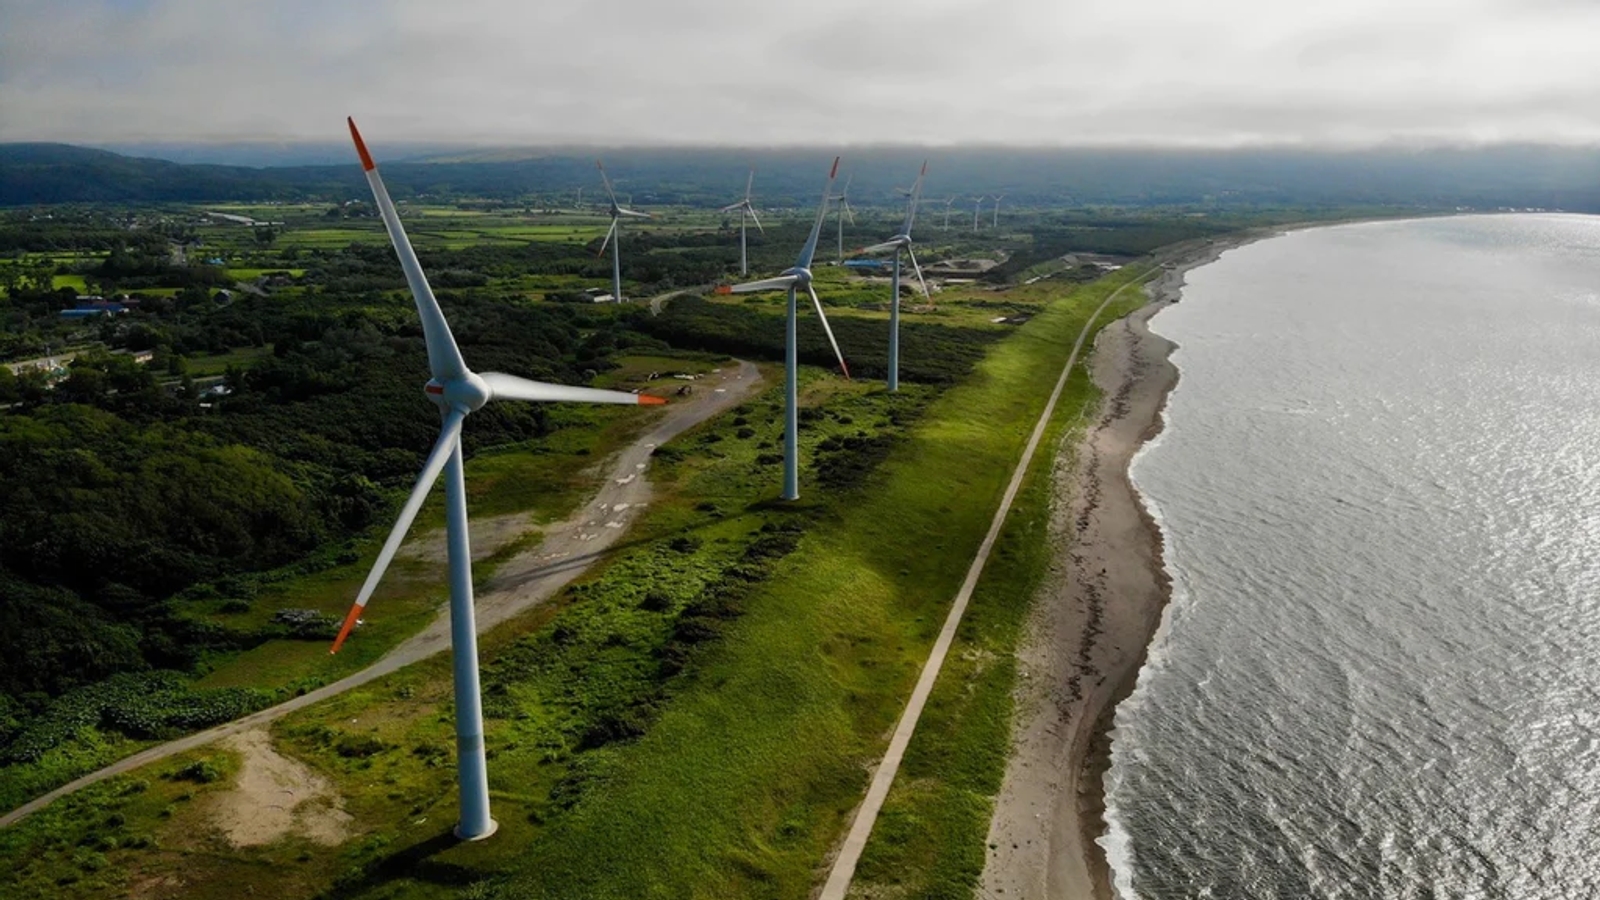 A photo of a row of wind turbines on the shore next to a beach